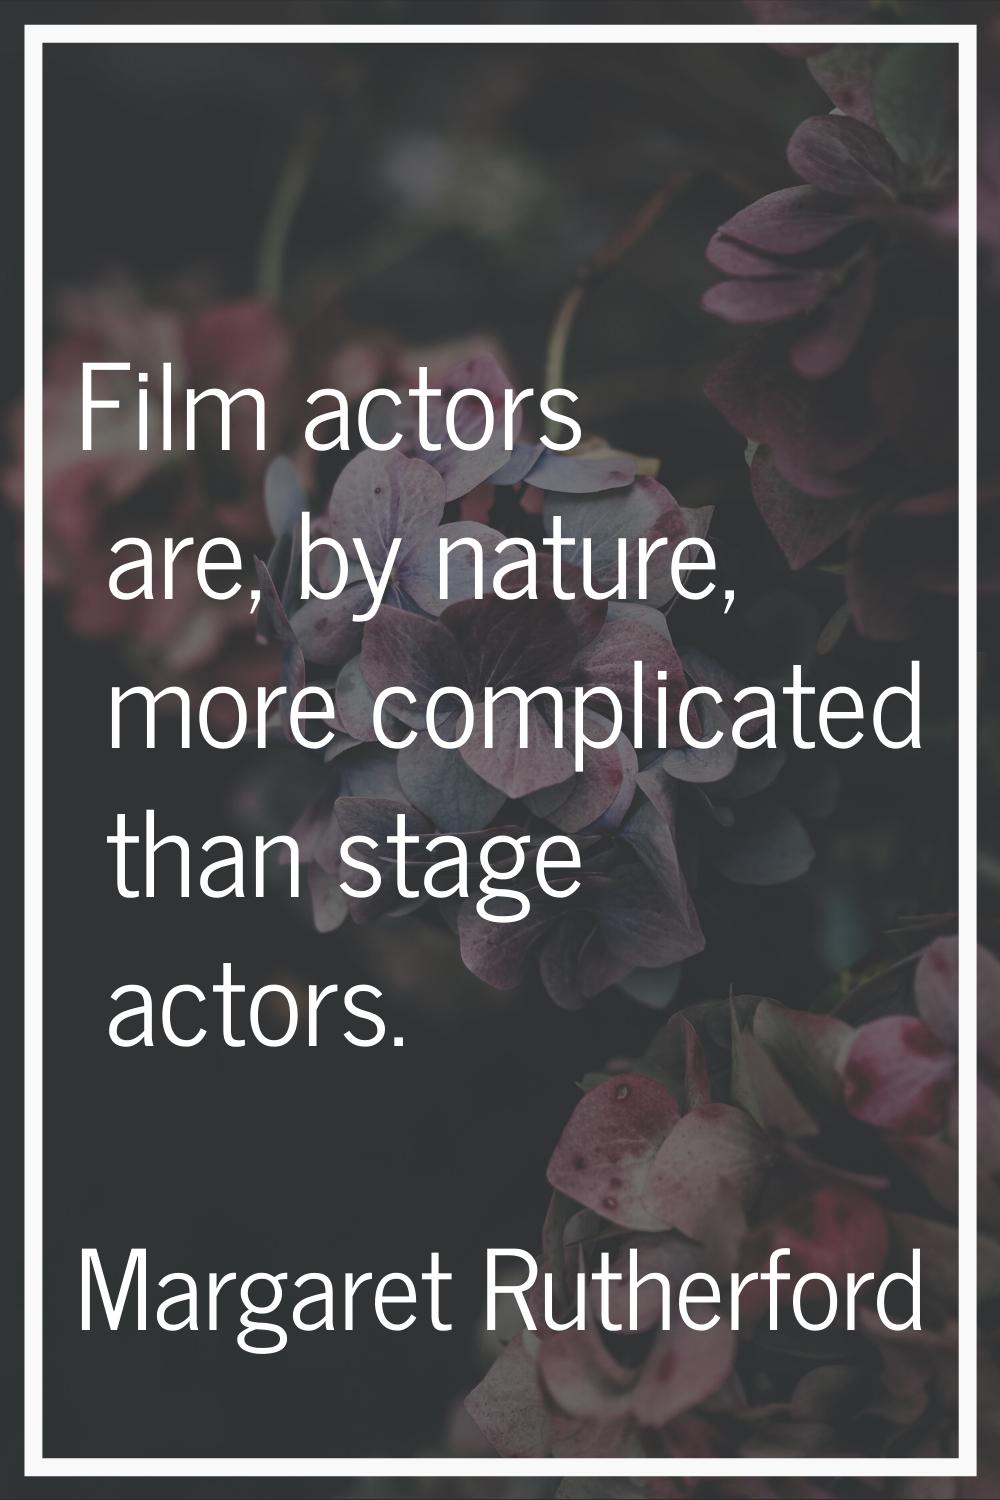 Film actors are, by nature, more complicated than stage actors.